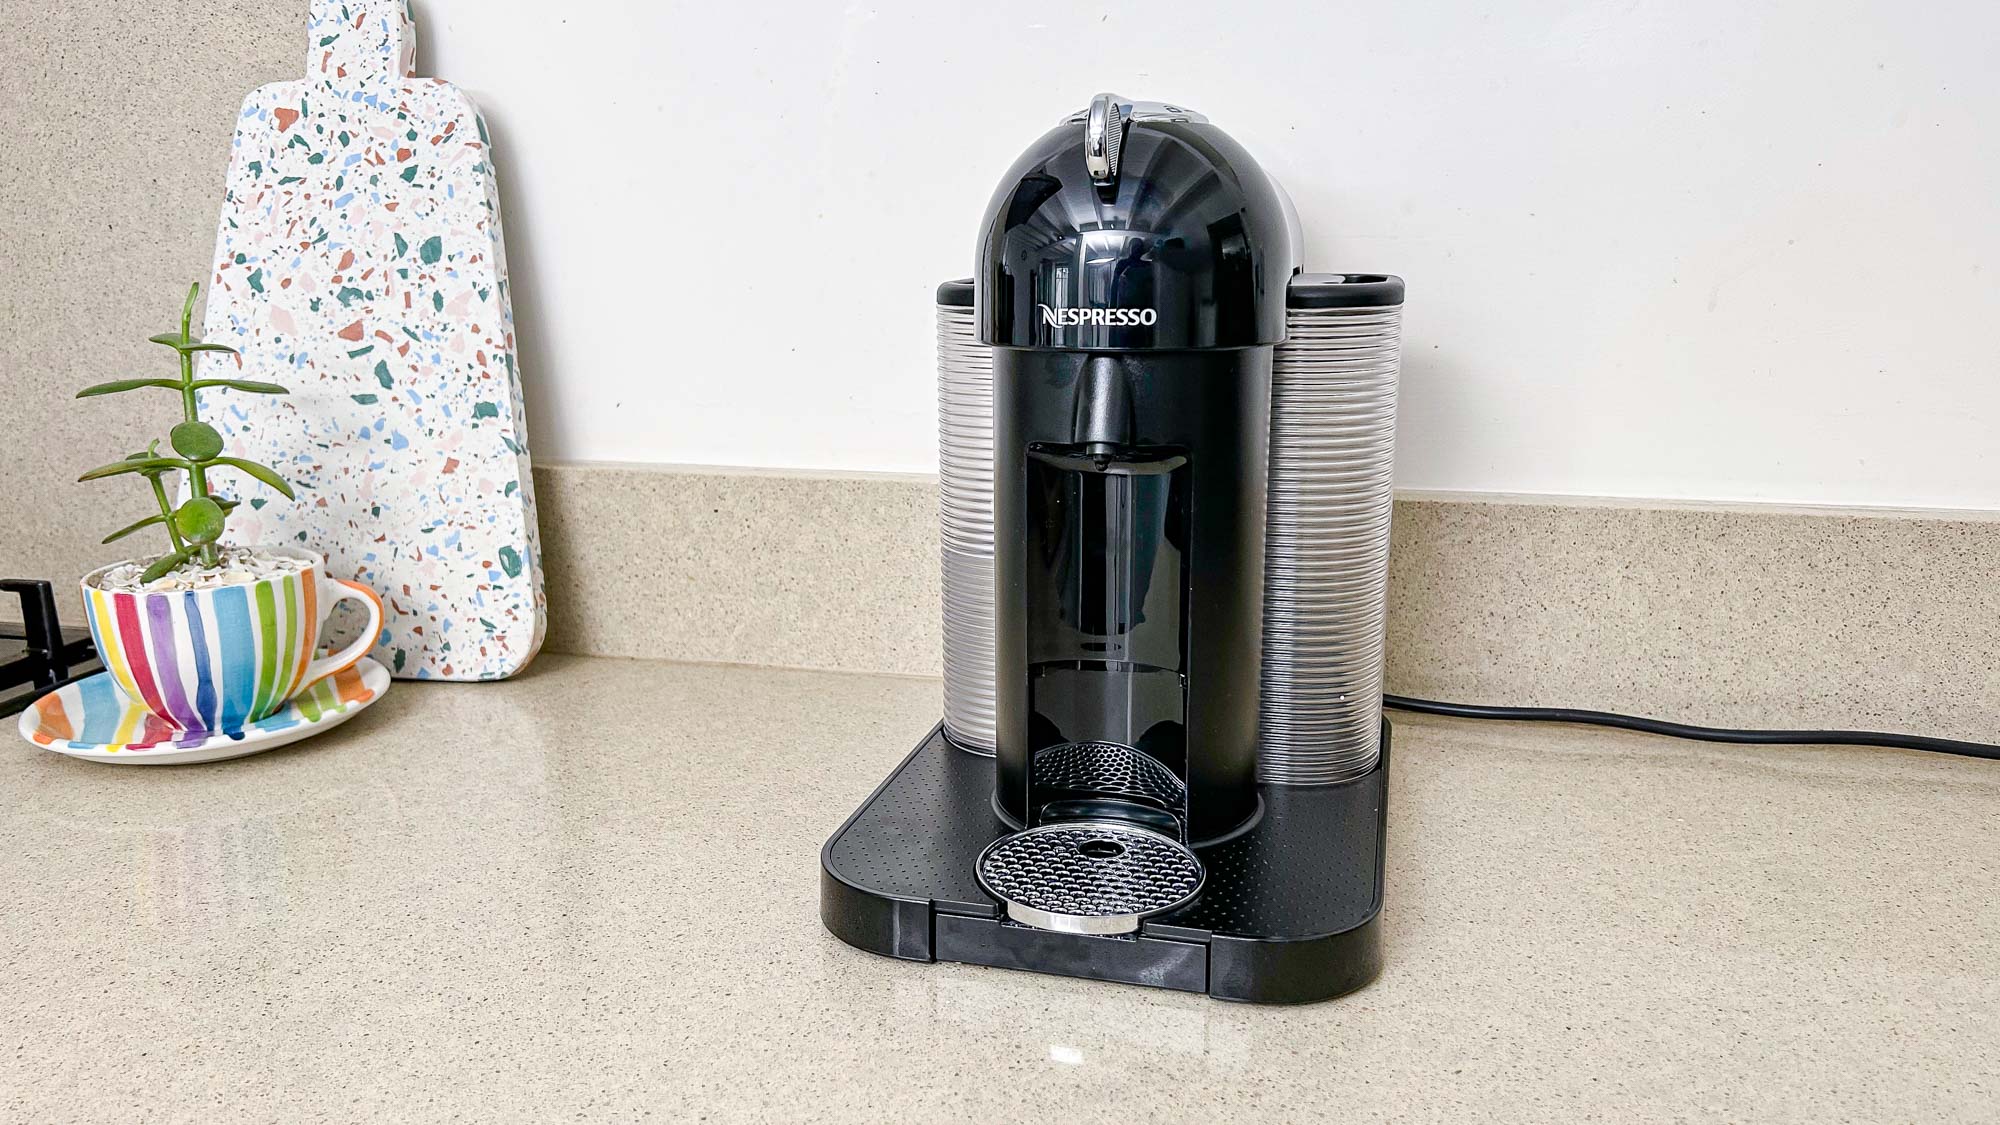 Making Iced Coffee Has Never Been Easier with Nespresso's Vertuo